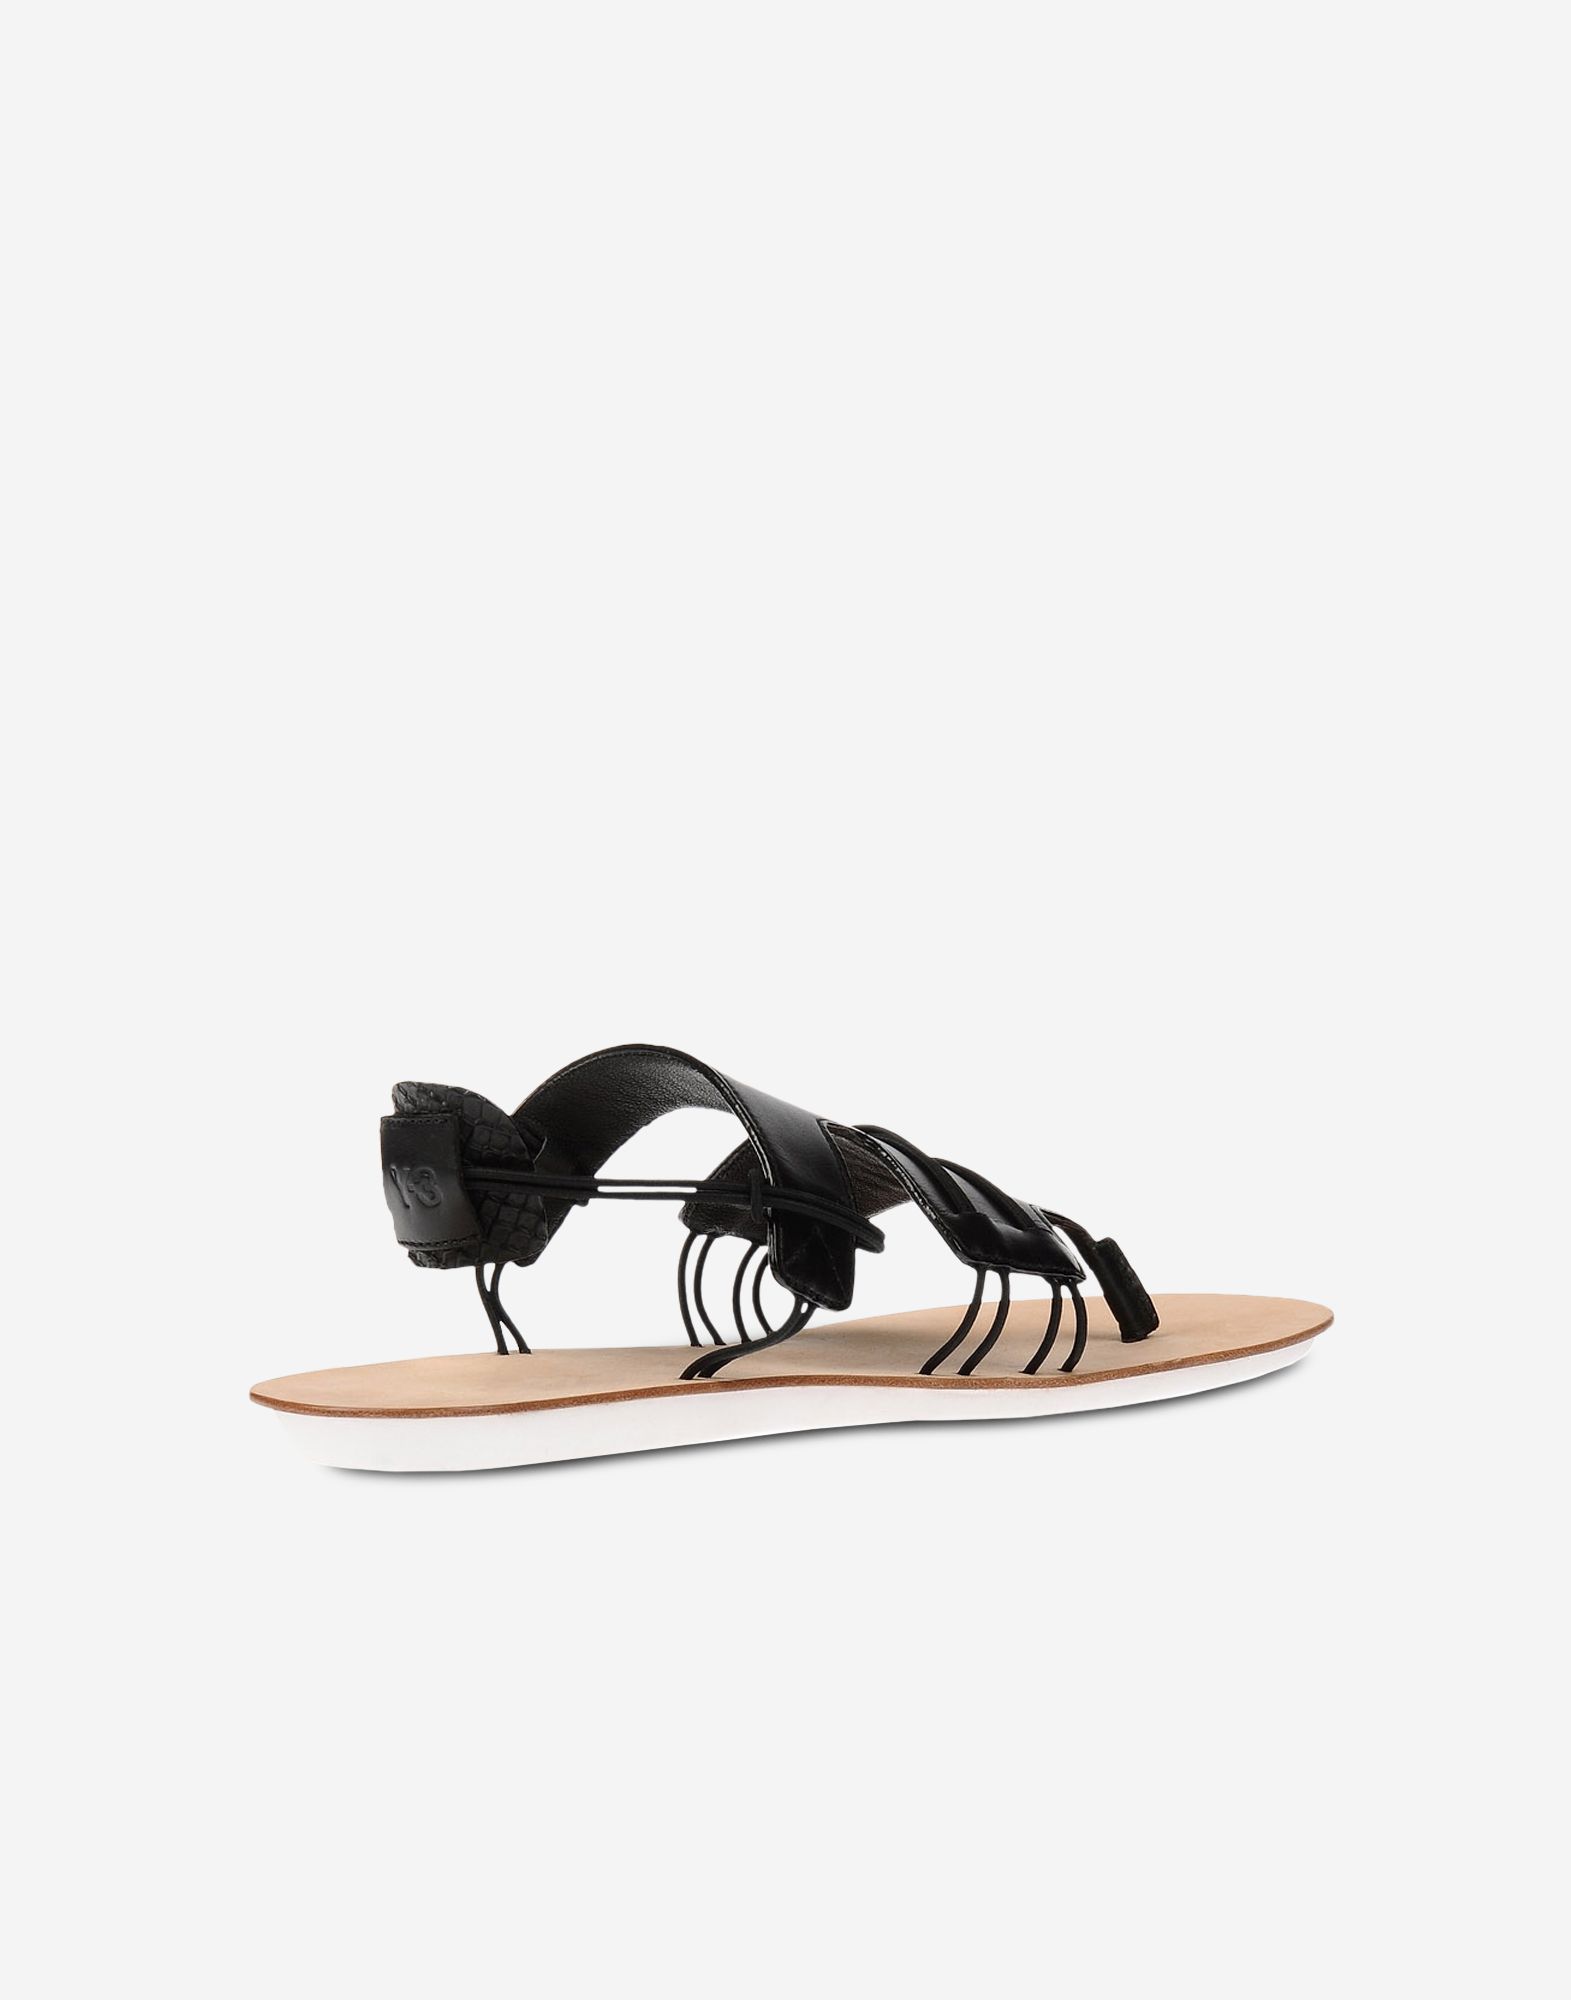 Y 3 Stretch Sandal for Women | Adidas Y-3 Official Store